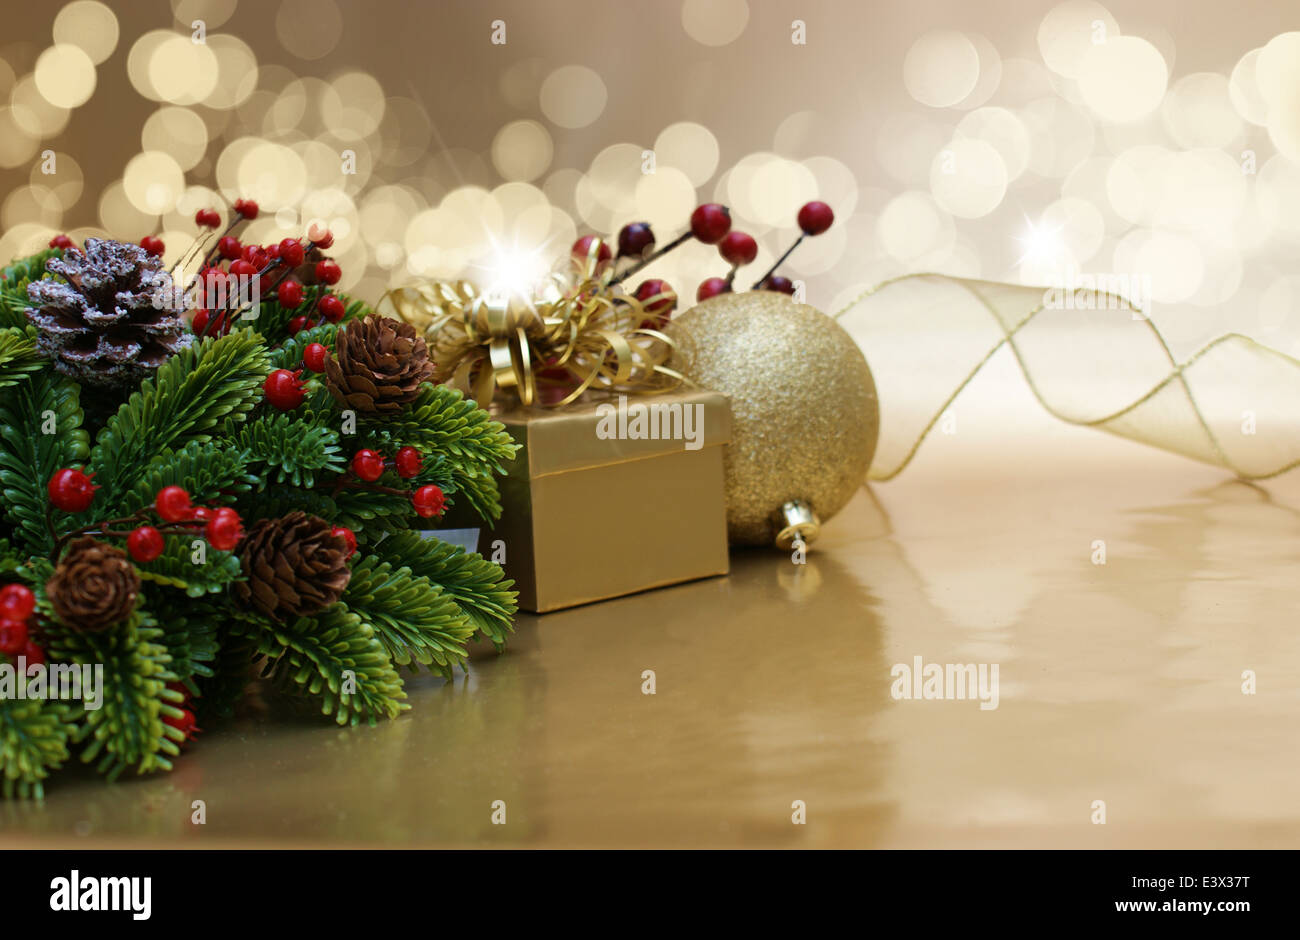 Christmas background with gift and baubles Stock Photo